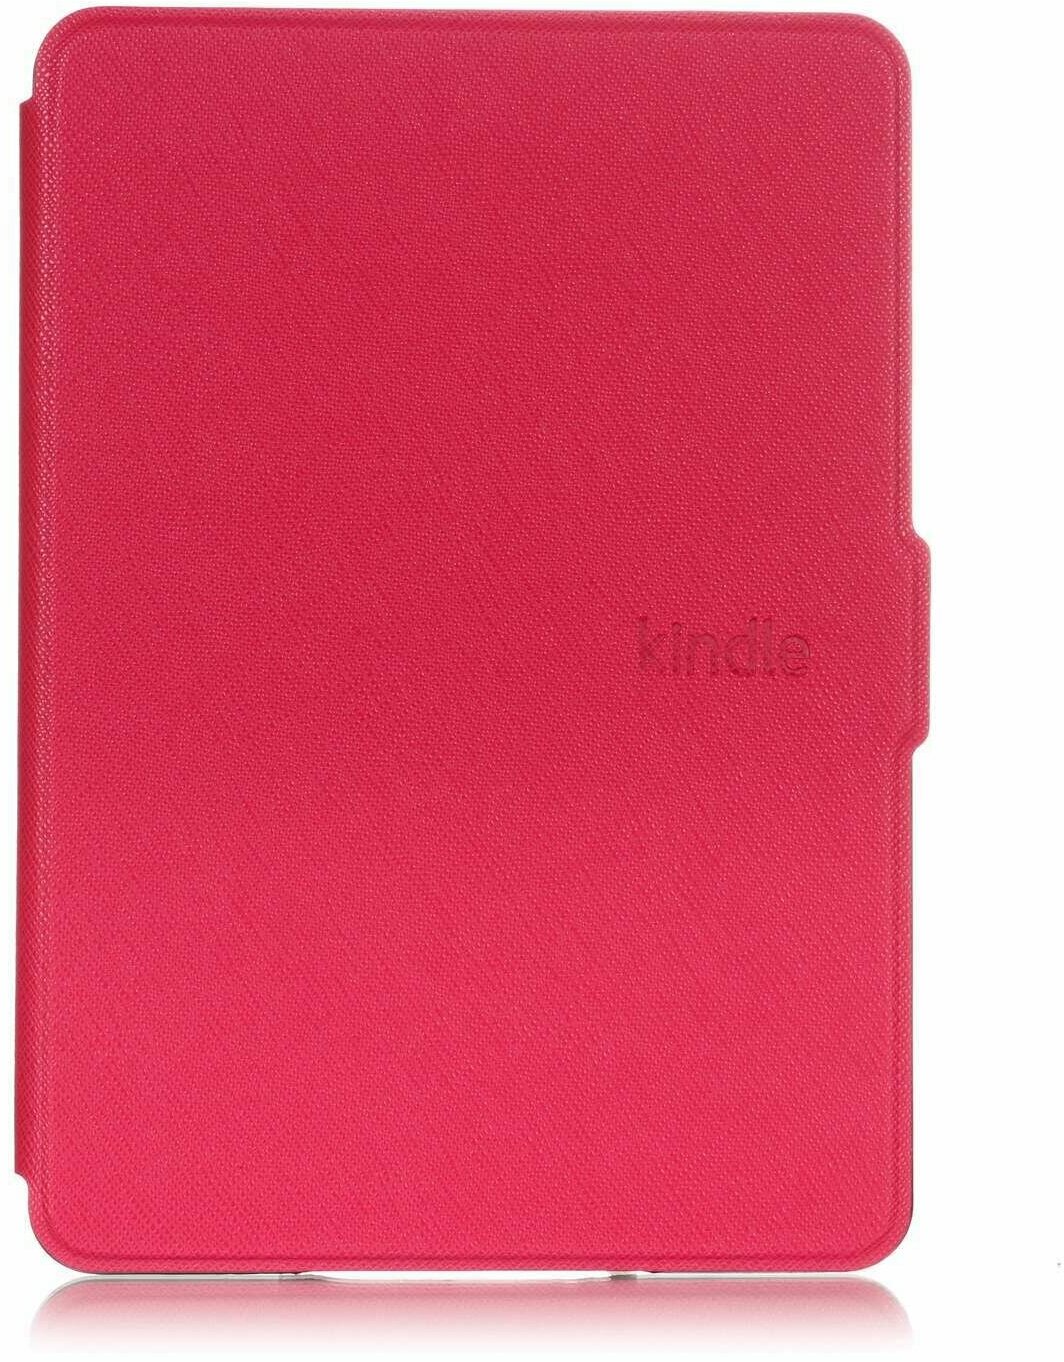 -  Amazon Kindle PaperWhite 1 / 2 / 3 (2012/2013/2015) rose red